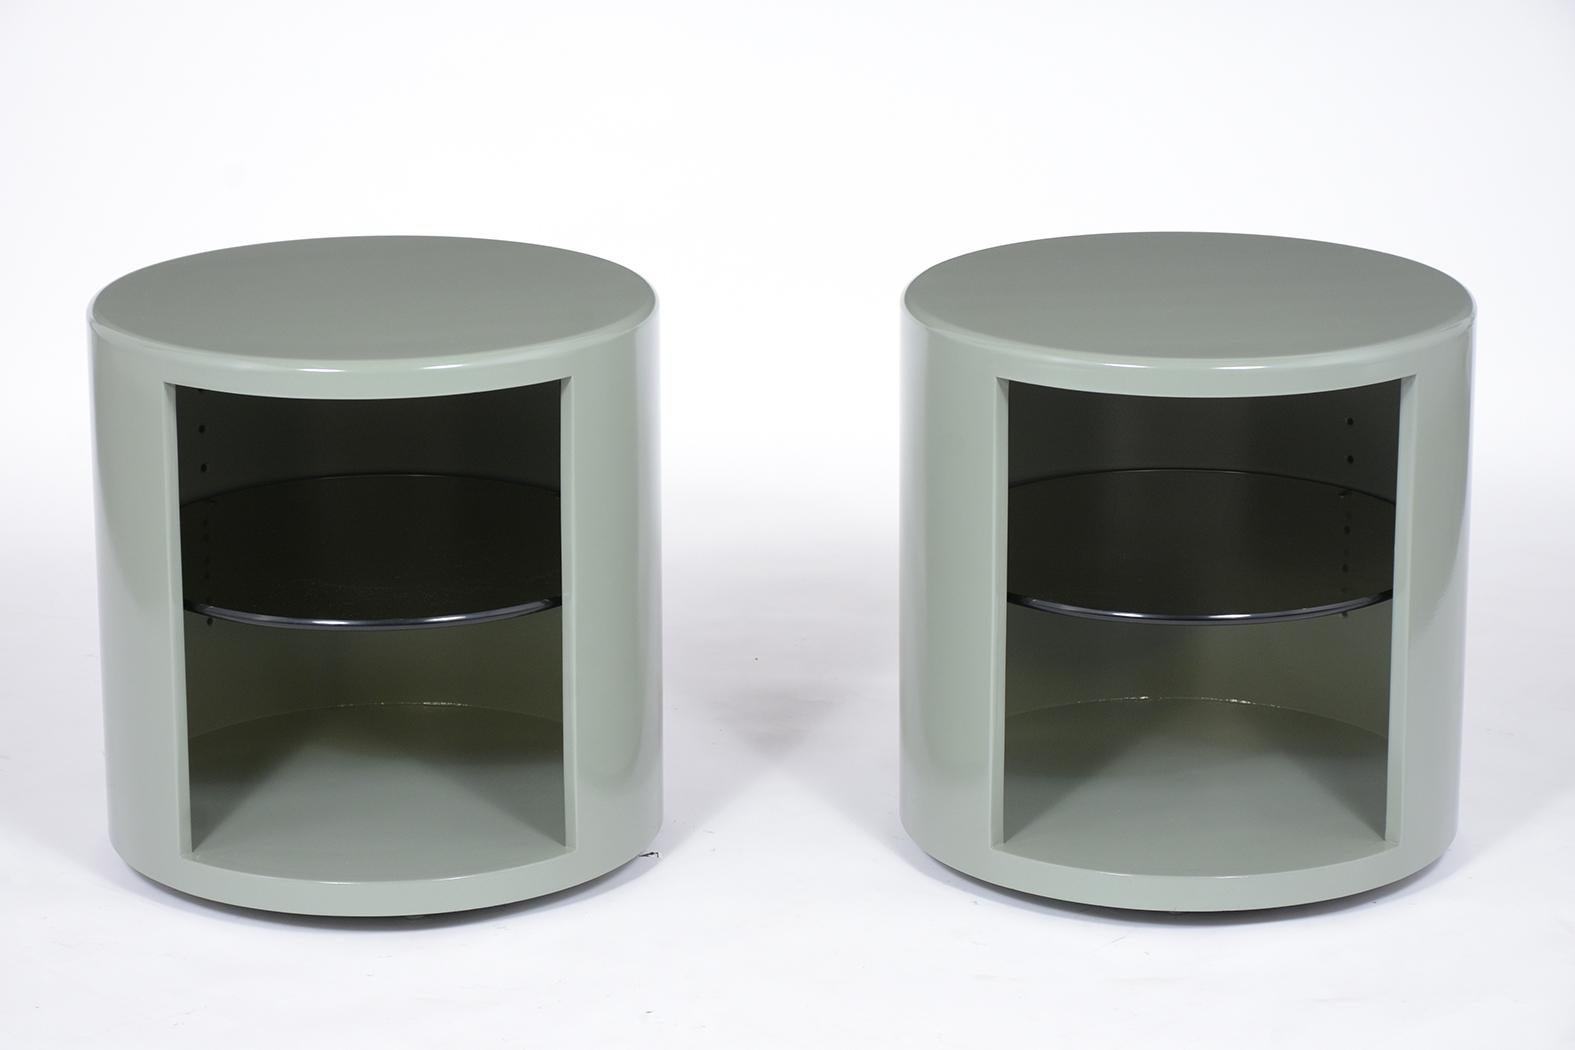 A unique pair of Mid-Century Modern round side tables handcrafted out of maple wood features a mint green color with a newly lacquered finish. The pair of end tables have an open storage space with a black tinted glass self that is adjustable. These